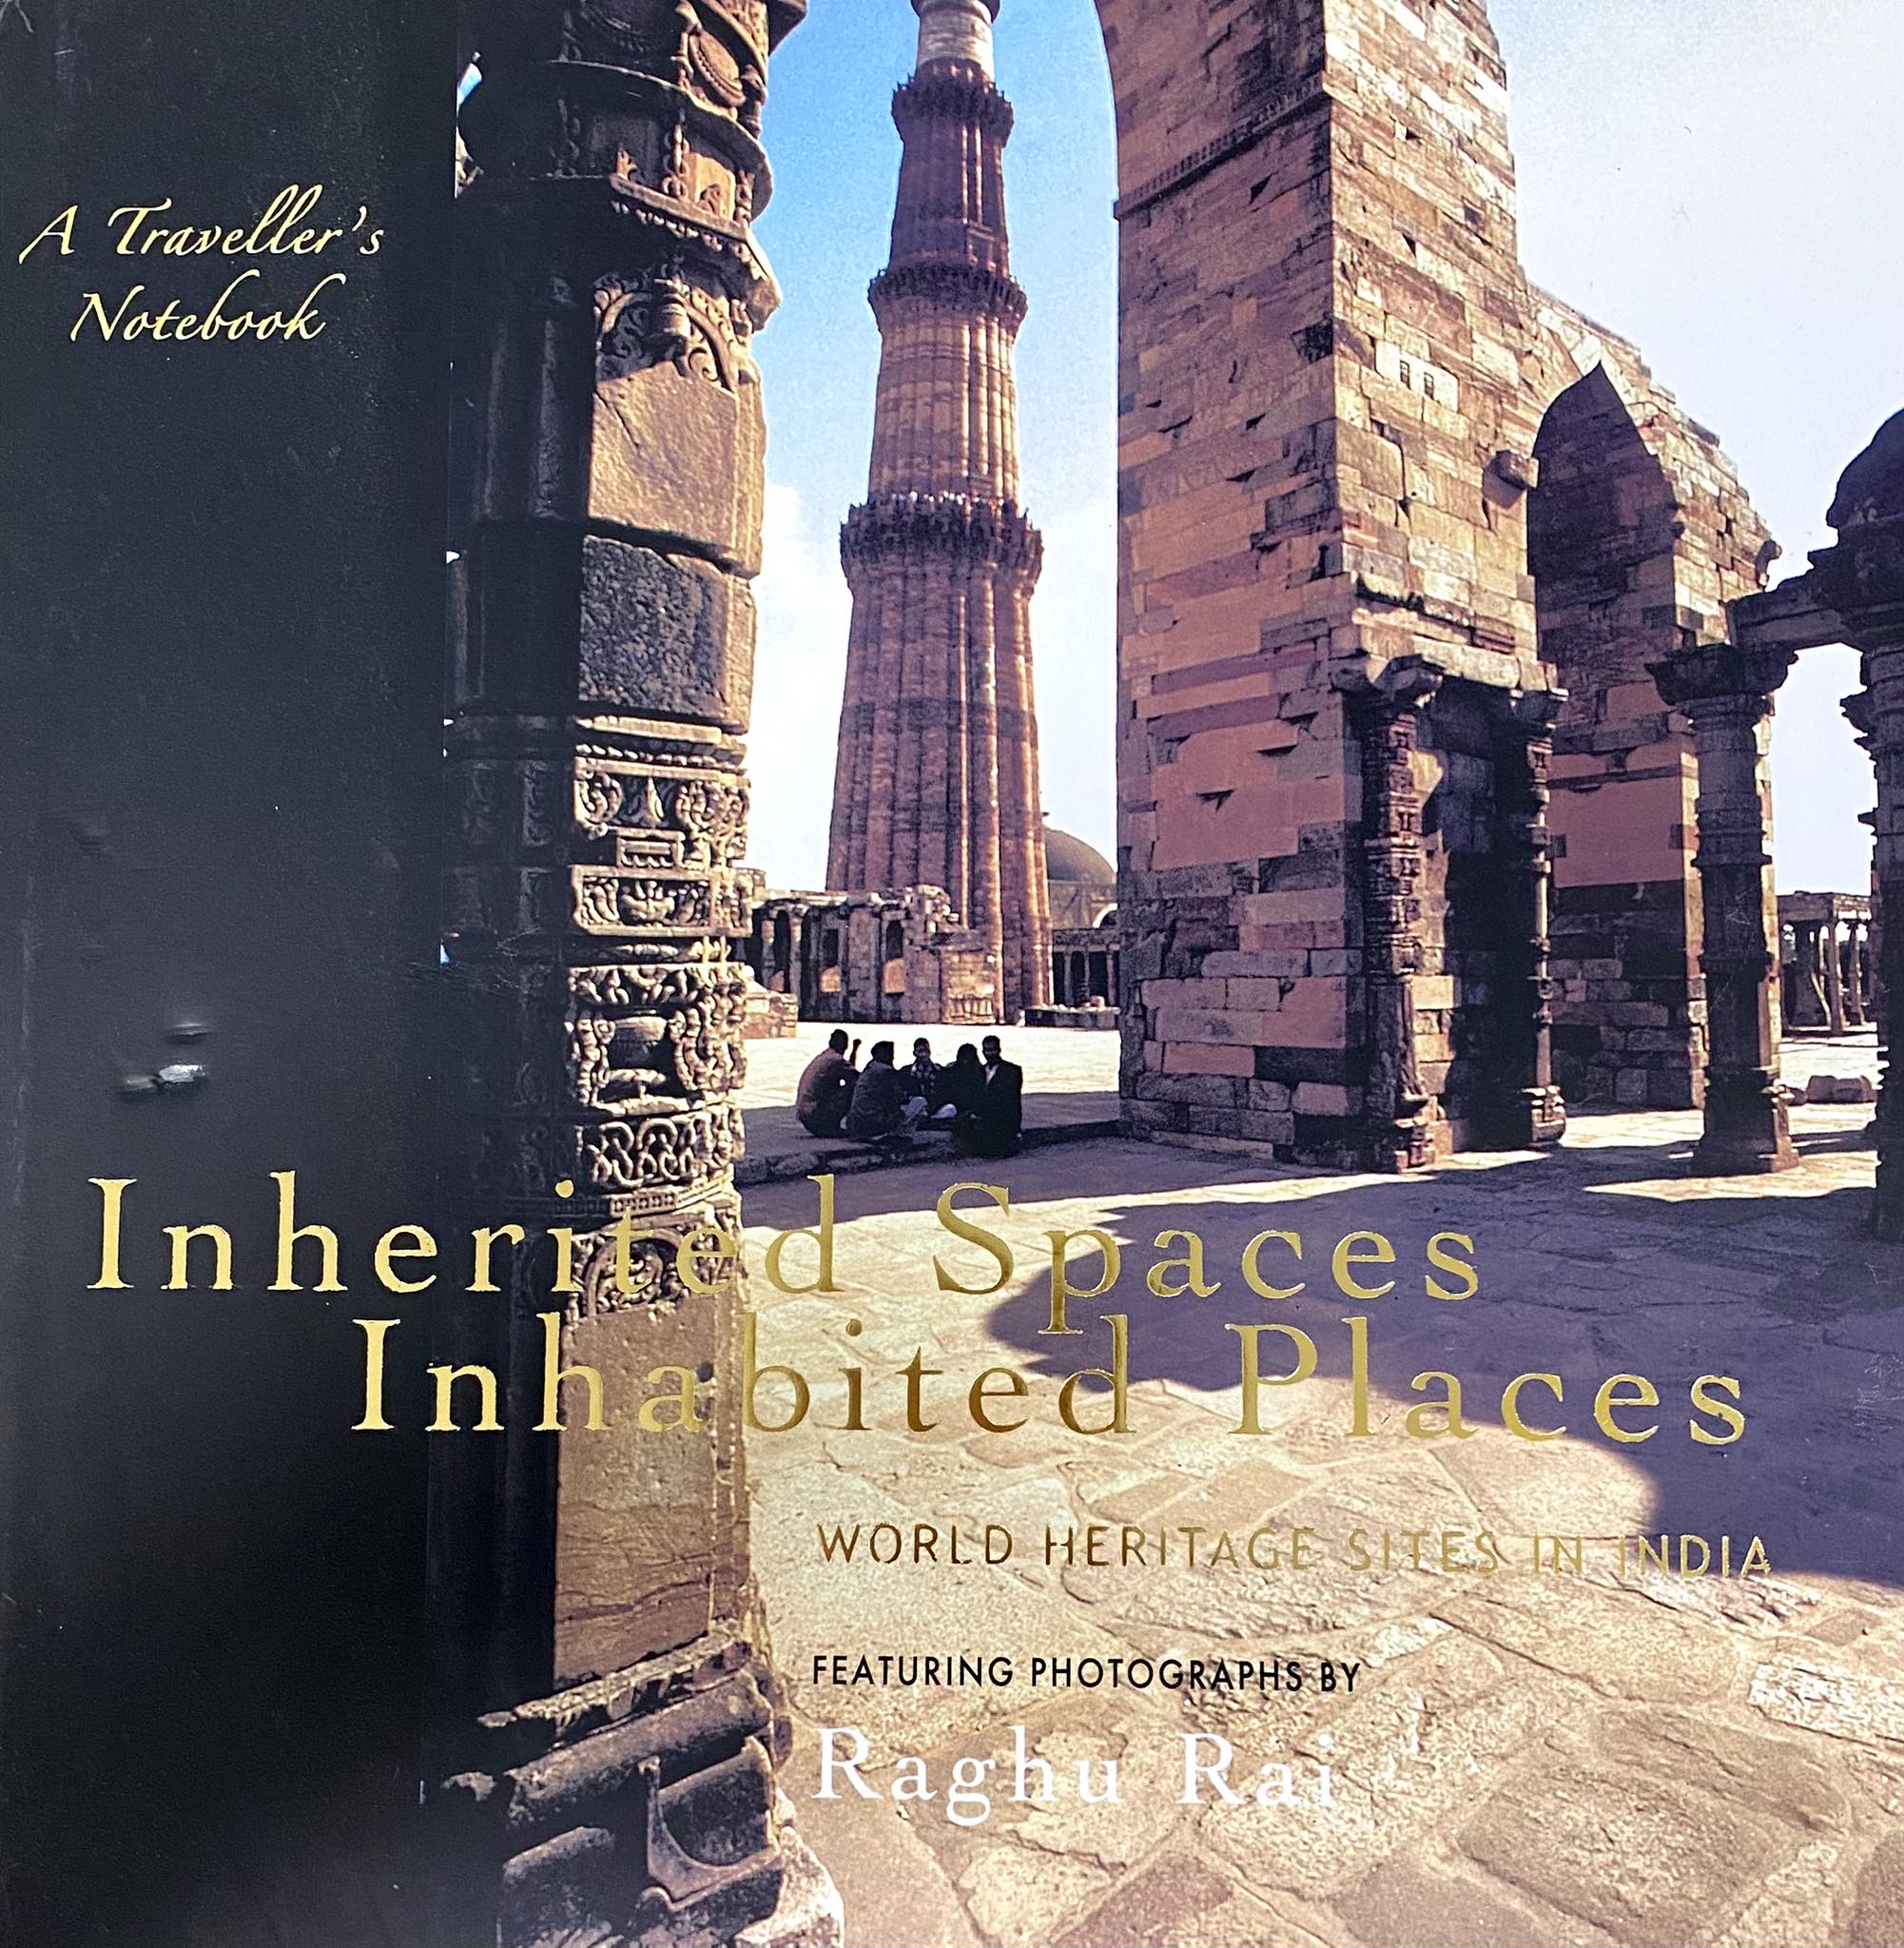 Inherited spaces inhabited places : world heritage sites in India 